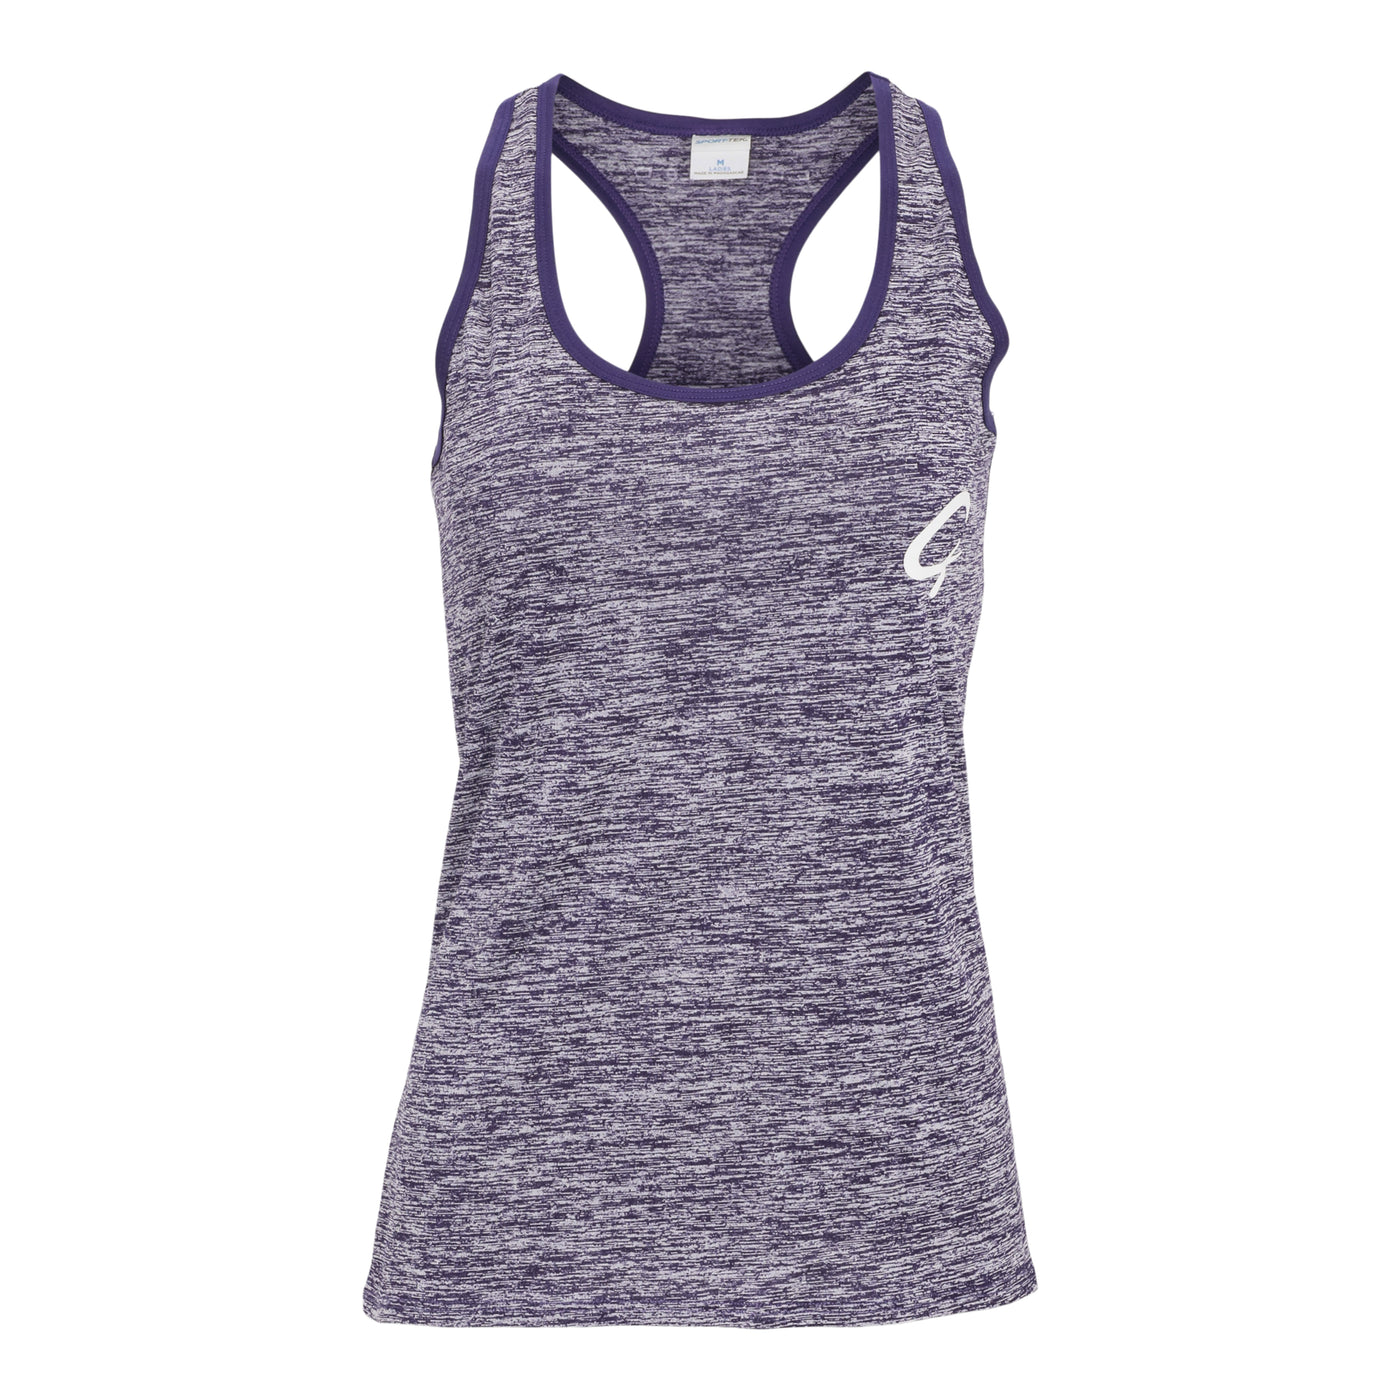 Created Women's Charged electric purple tank top alternate front view